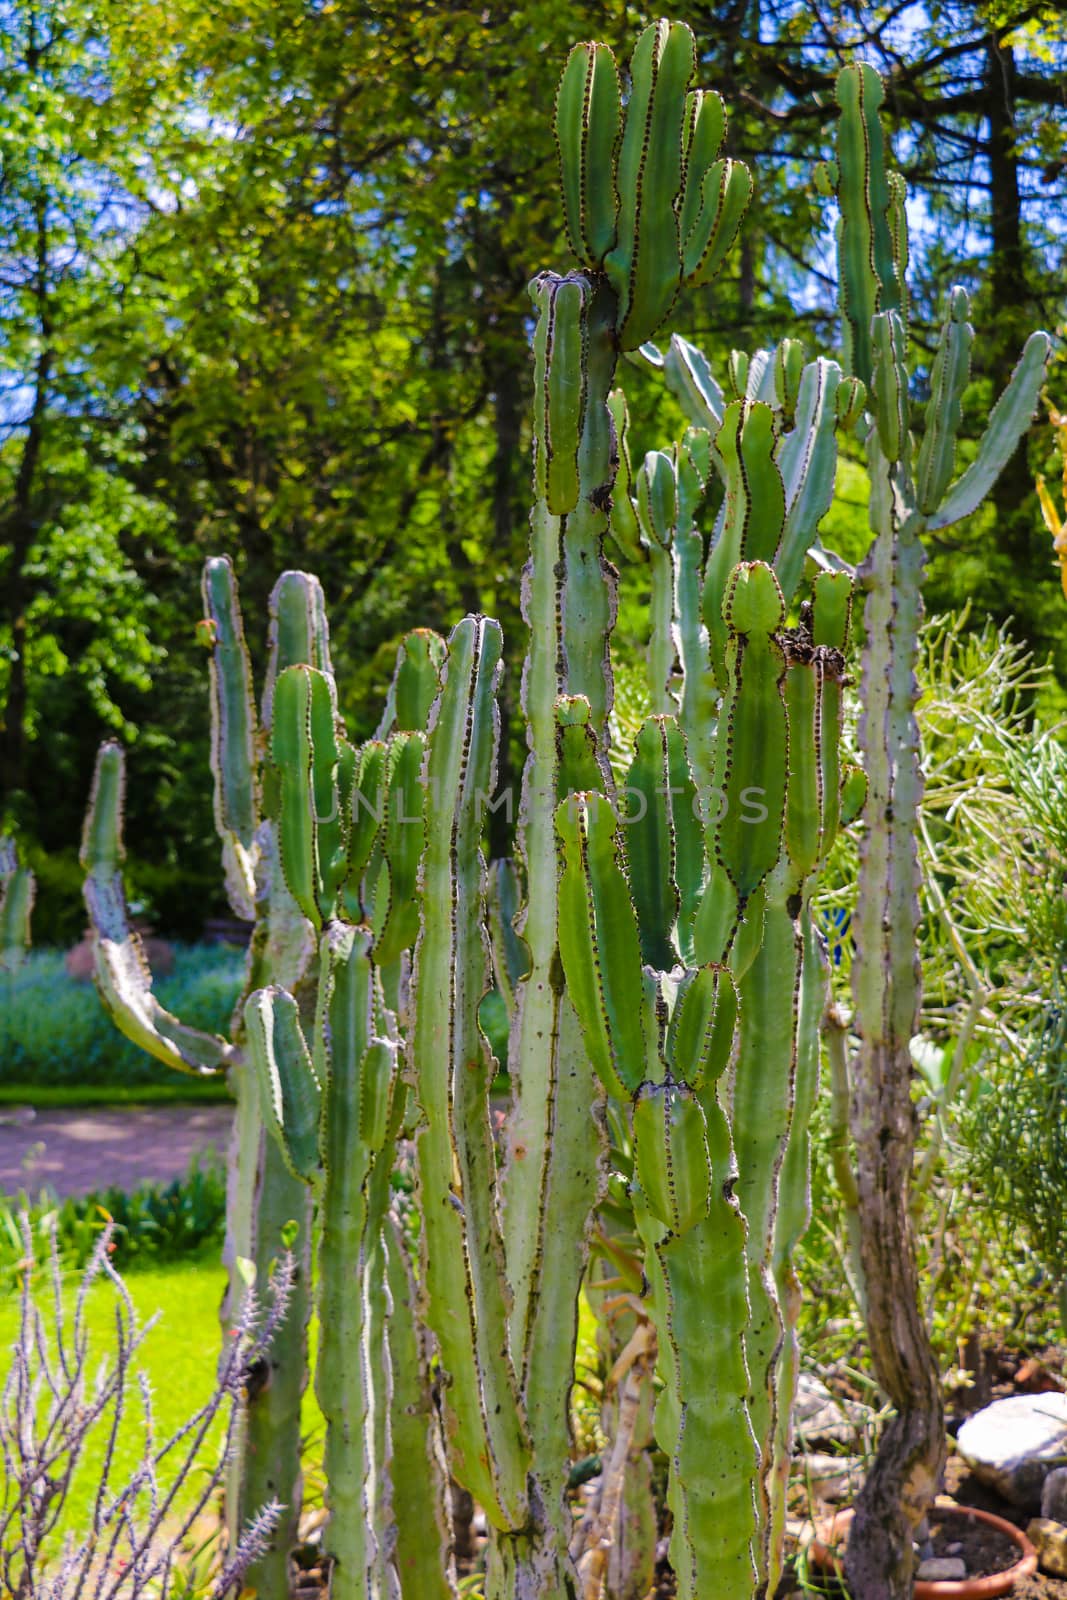 Large green cactus on a clear day, selective focus, sharp needles